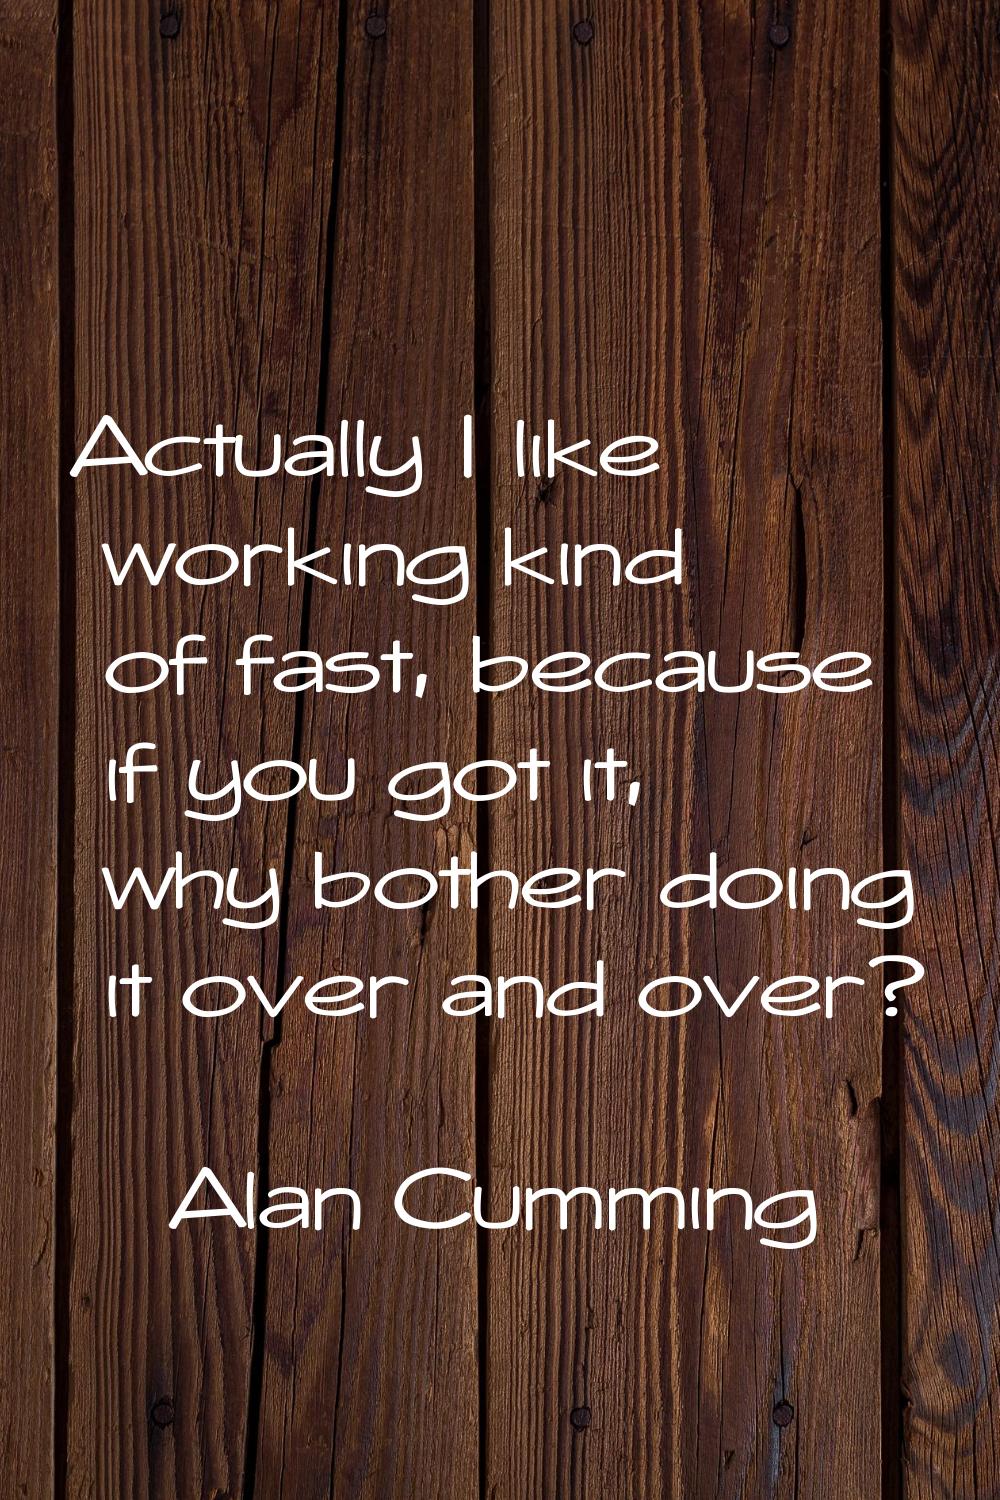 Actually I like working kind of fast, because if you got it, why bother doing it over and over?